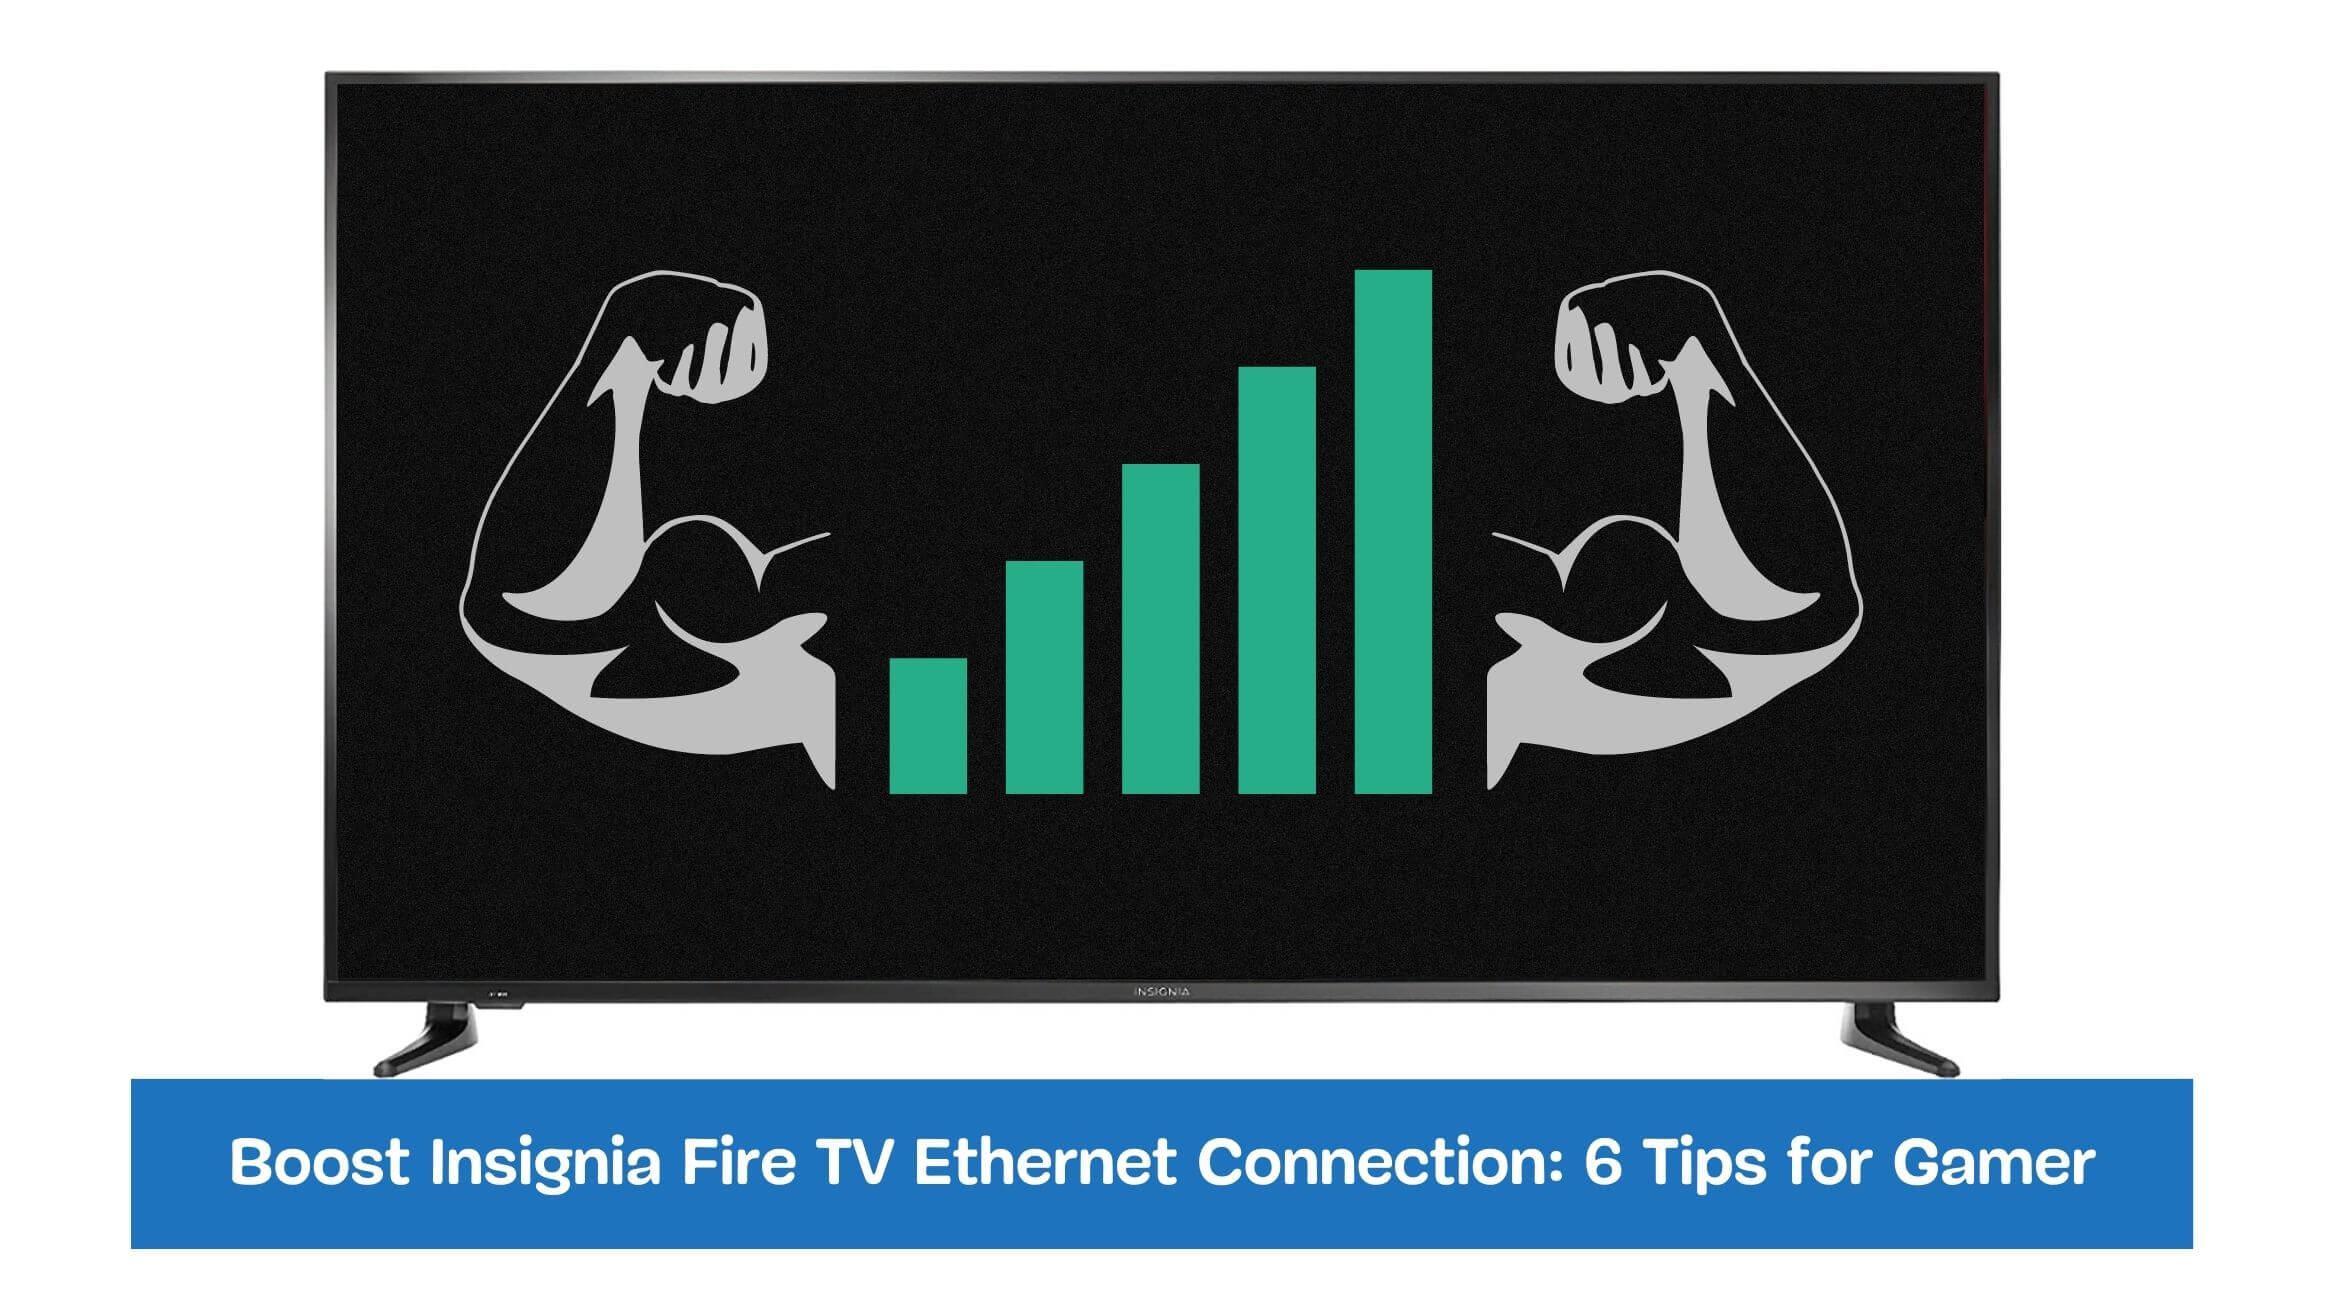 Boost Insignia Fire TV Ethernet Connection: 6 Tips for Gamer